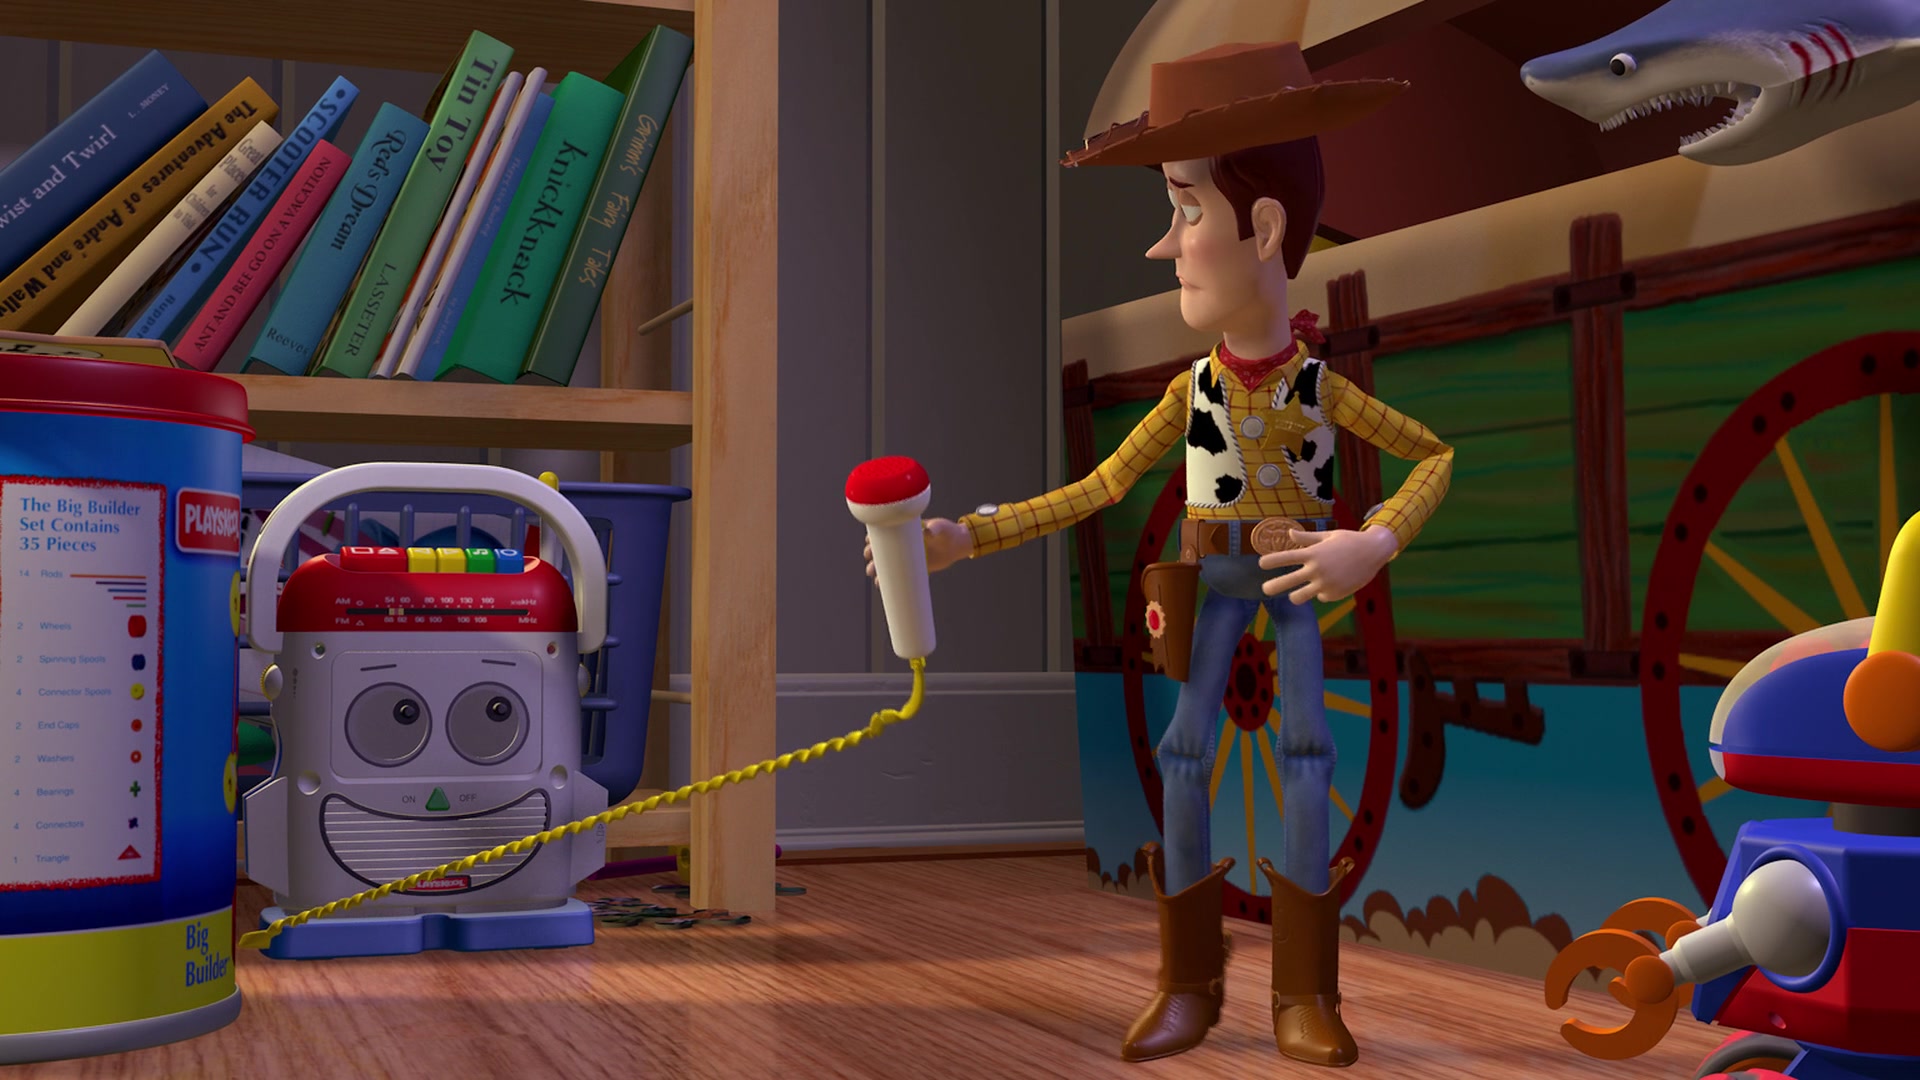 ...Playskool Voice Changer & Tape Recorder (Mr. Mike) in Toy Story (199...